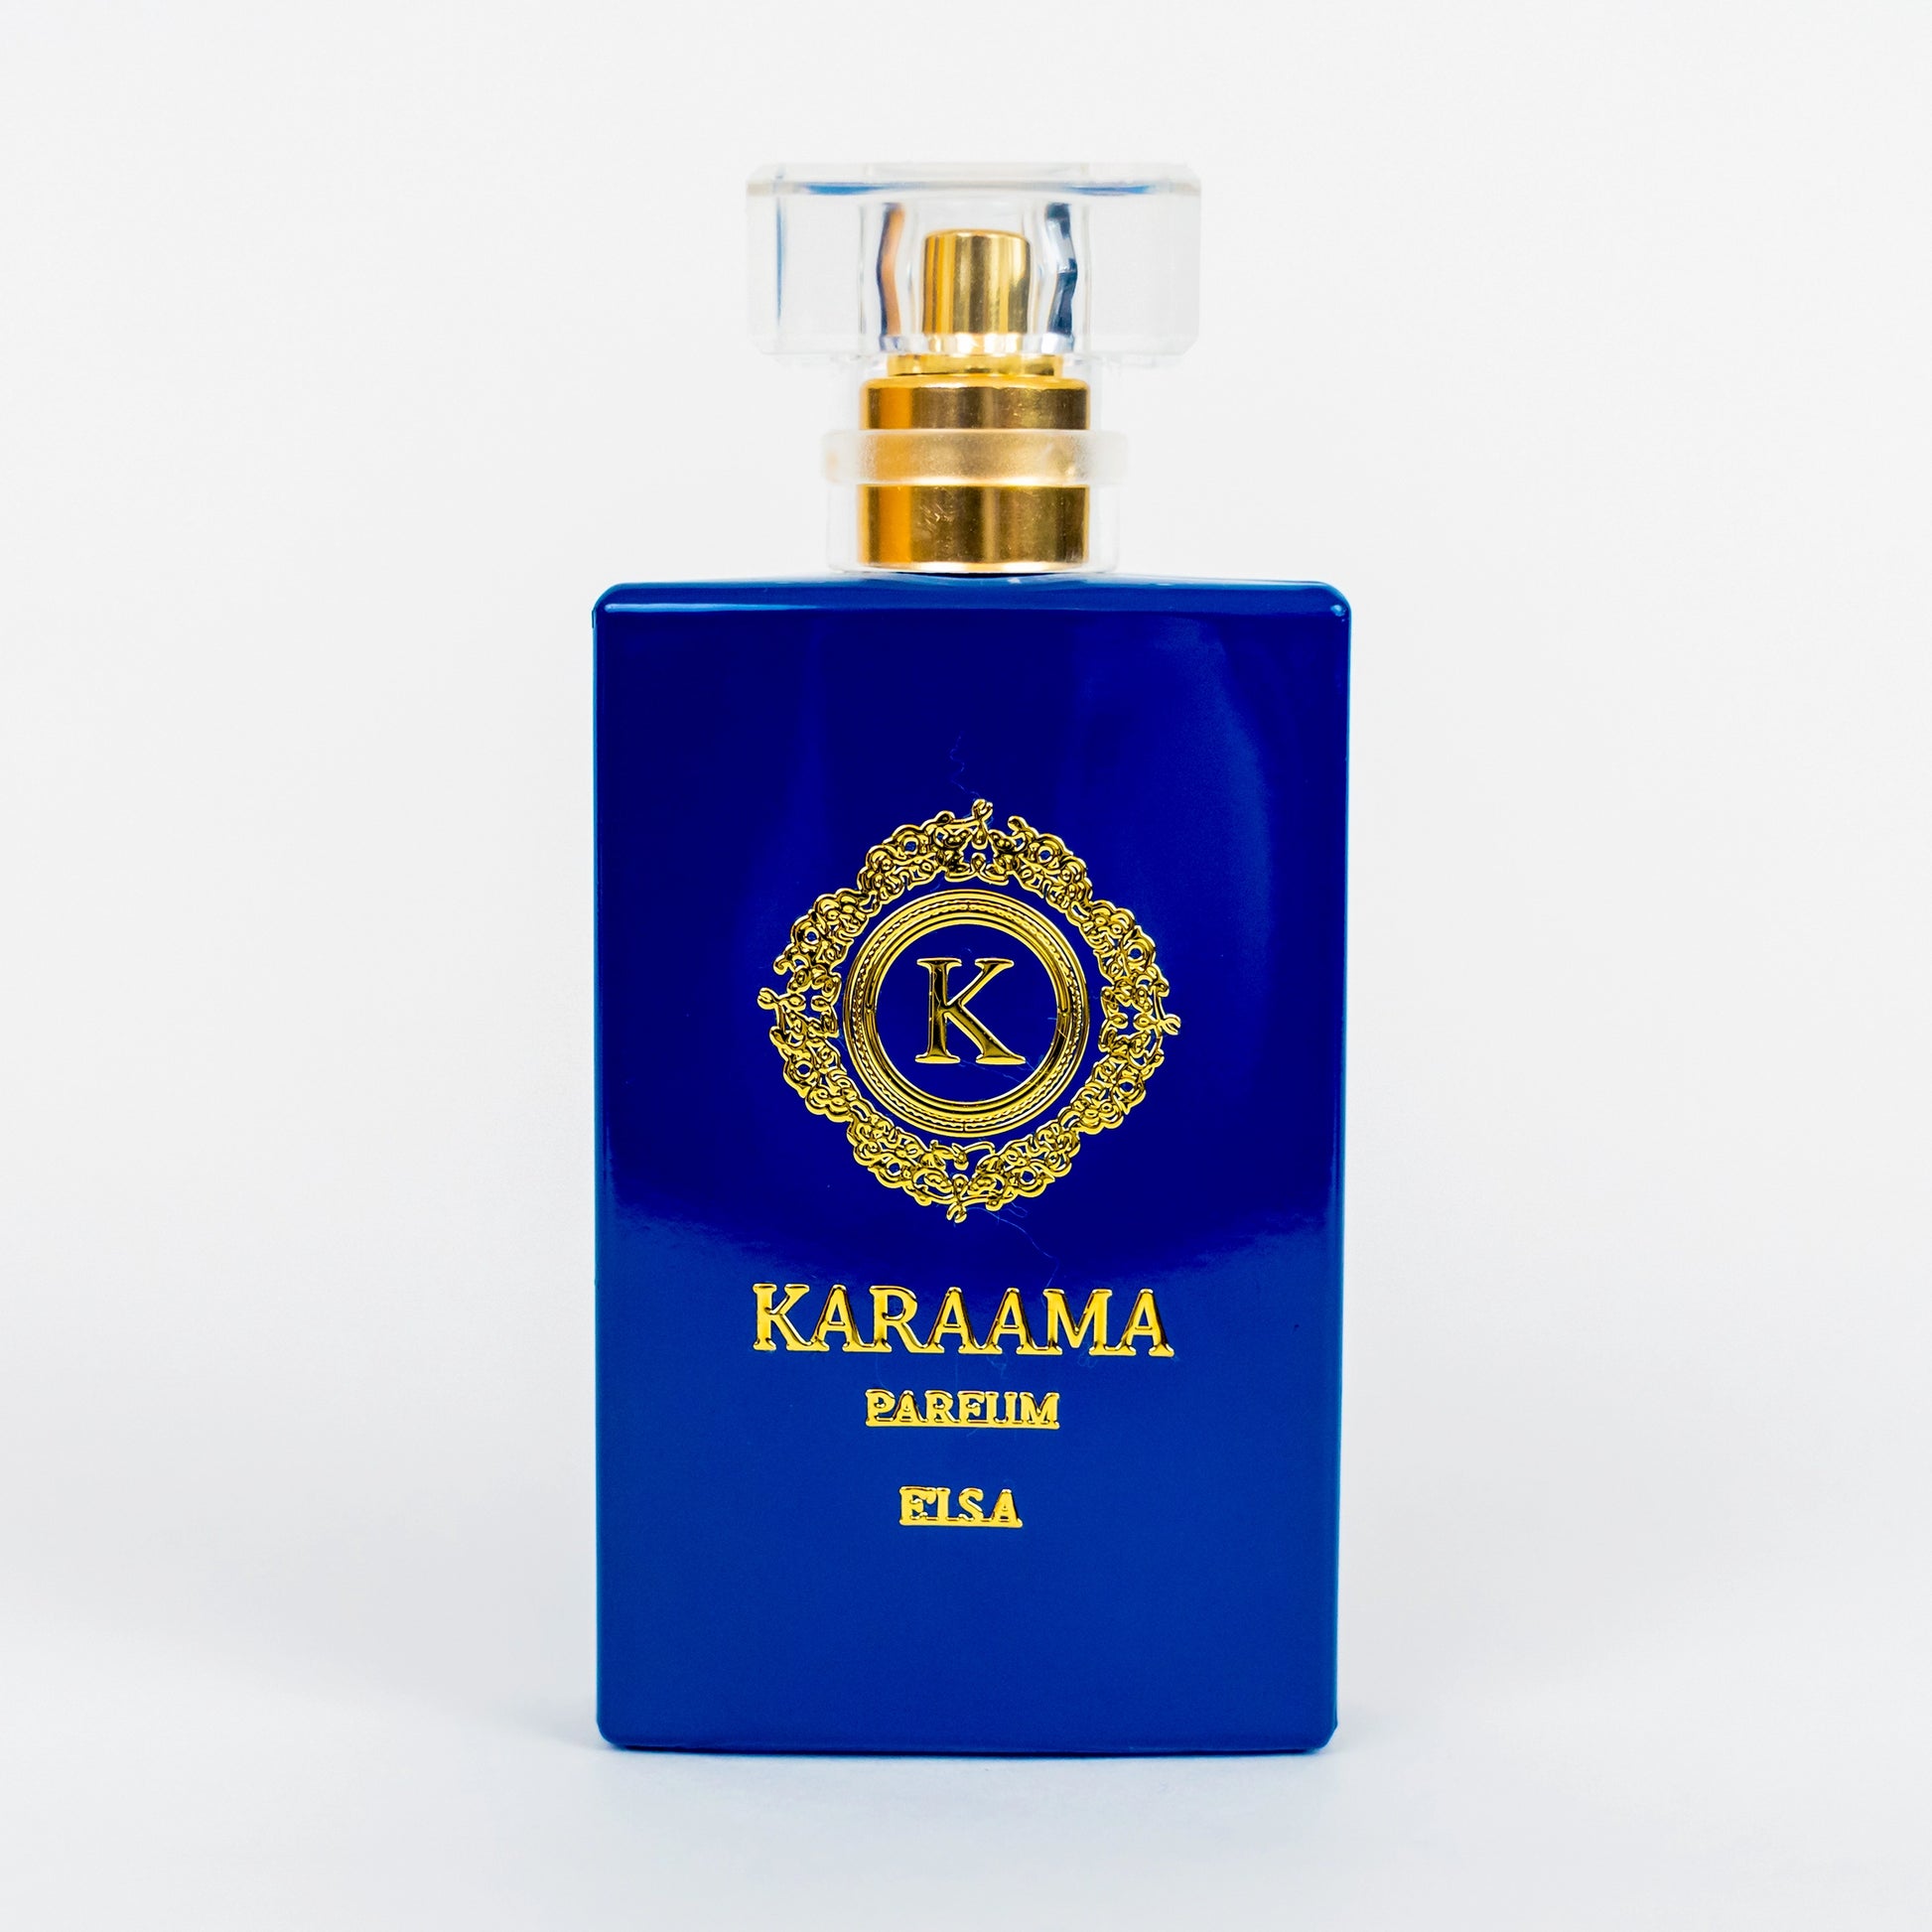 Elegant KARAAMA perfume bottle, featuring a rich blue hue and ornate golden detailing, exuding luxury and trendsetting style. Ideal for fragrance enthusiasts seeking a bold statement piece. #Perfume #LuxuryFragrance #FashionTrends #ScentGoals #StyleStatement